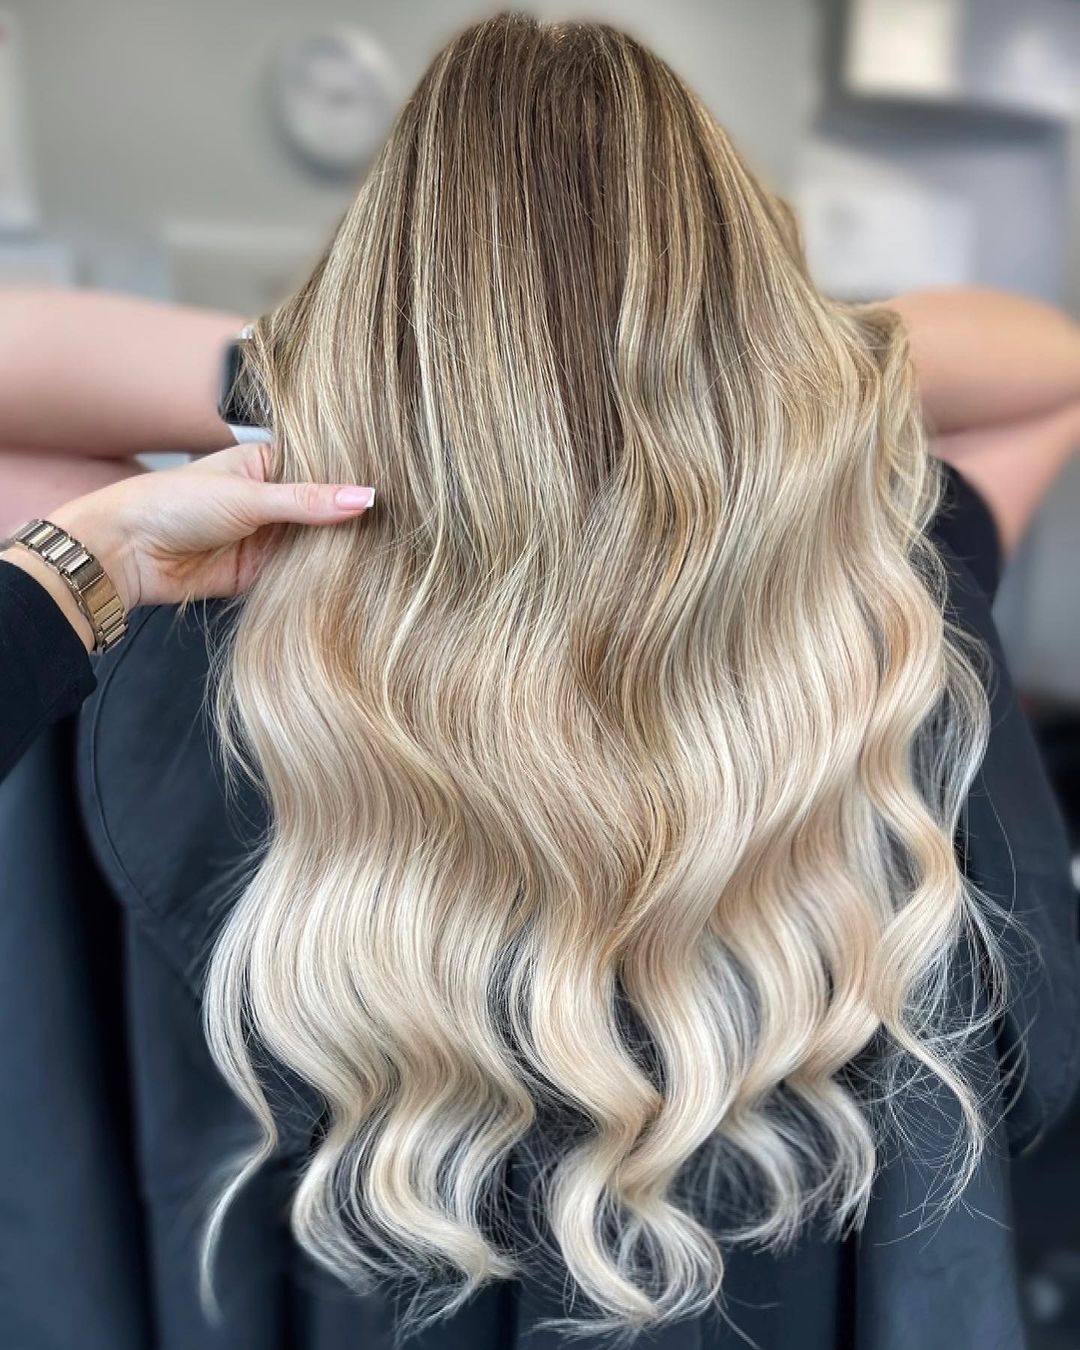 Long Elegant Curls with Blonde Ombre